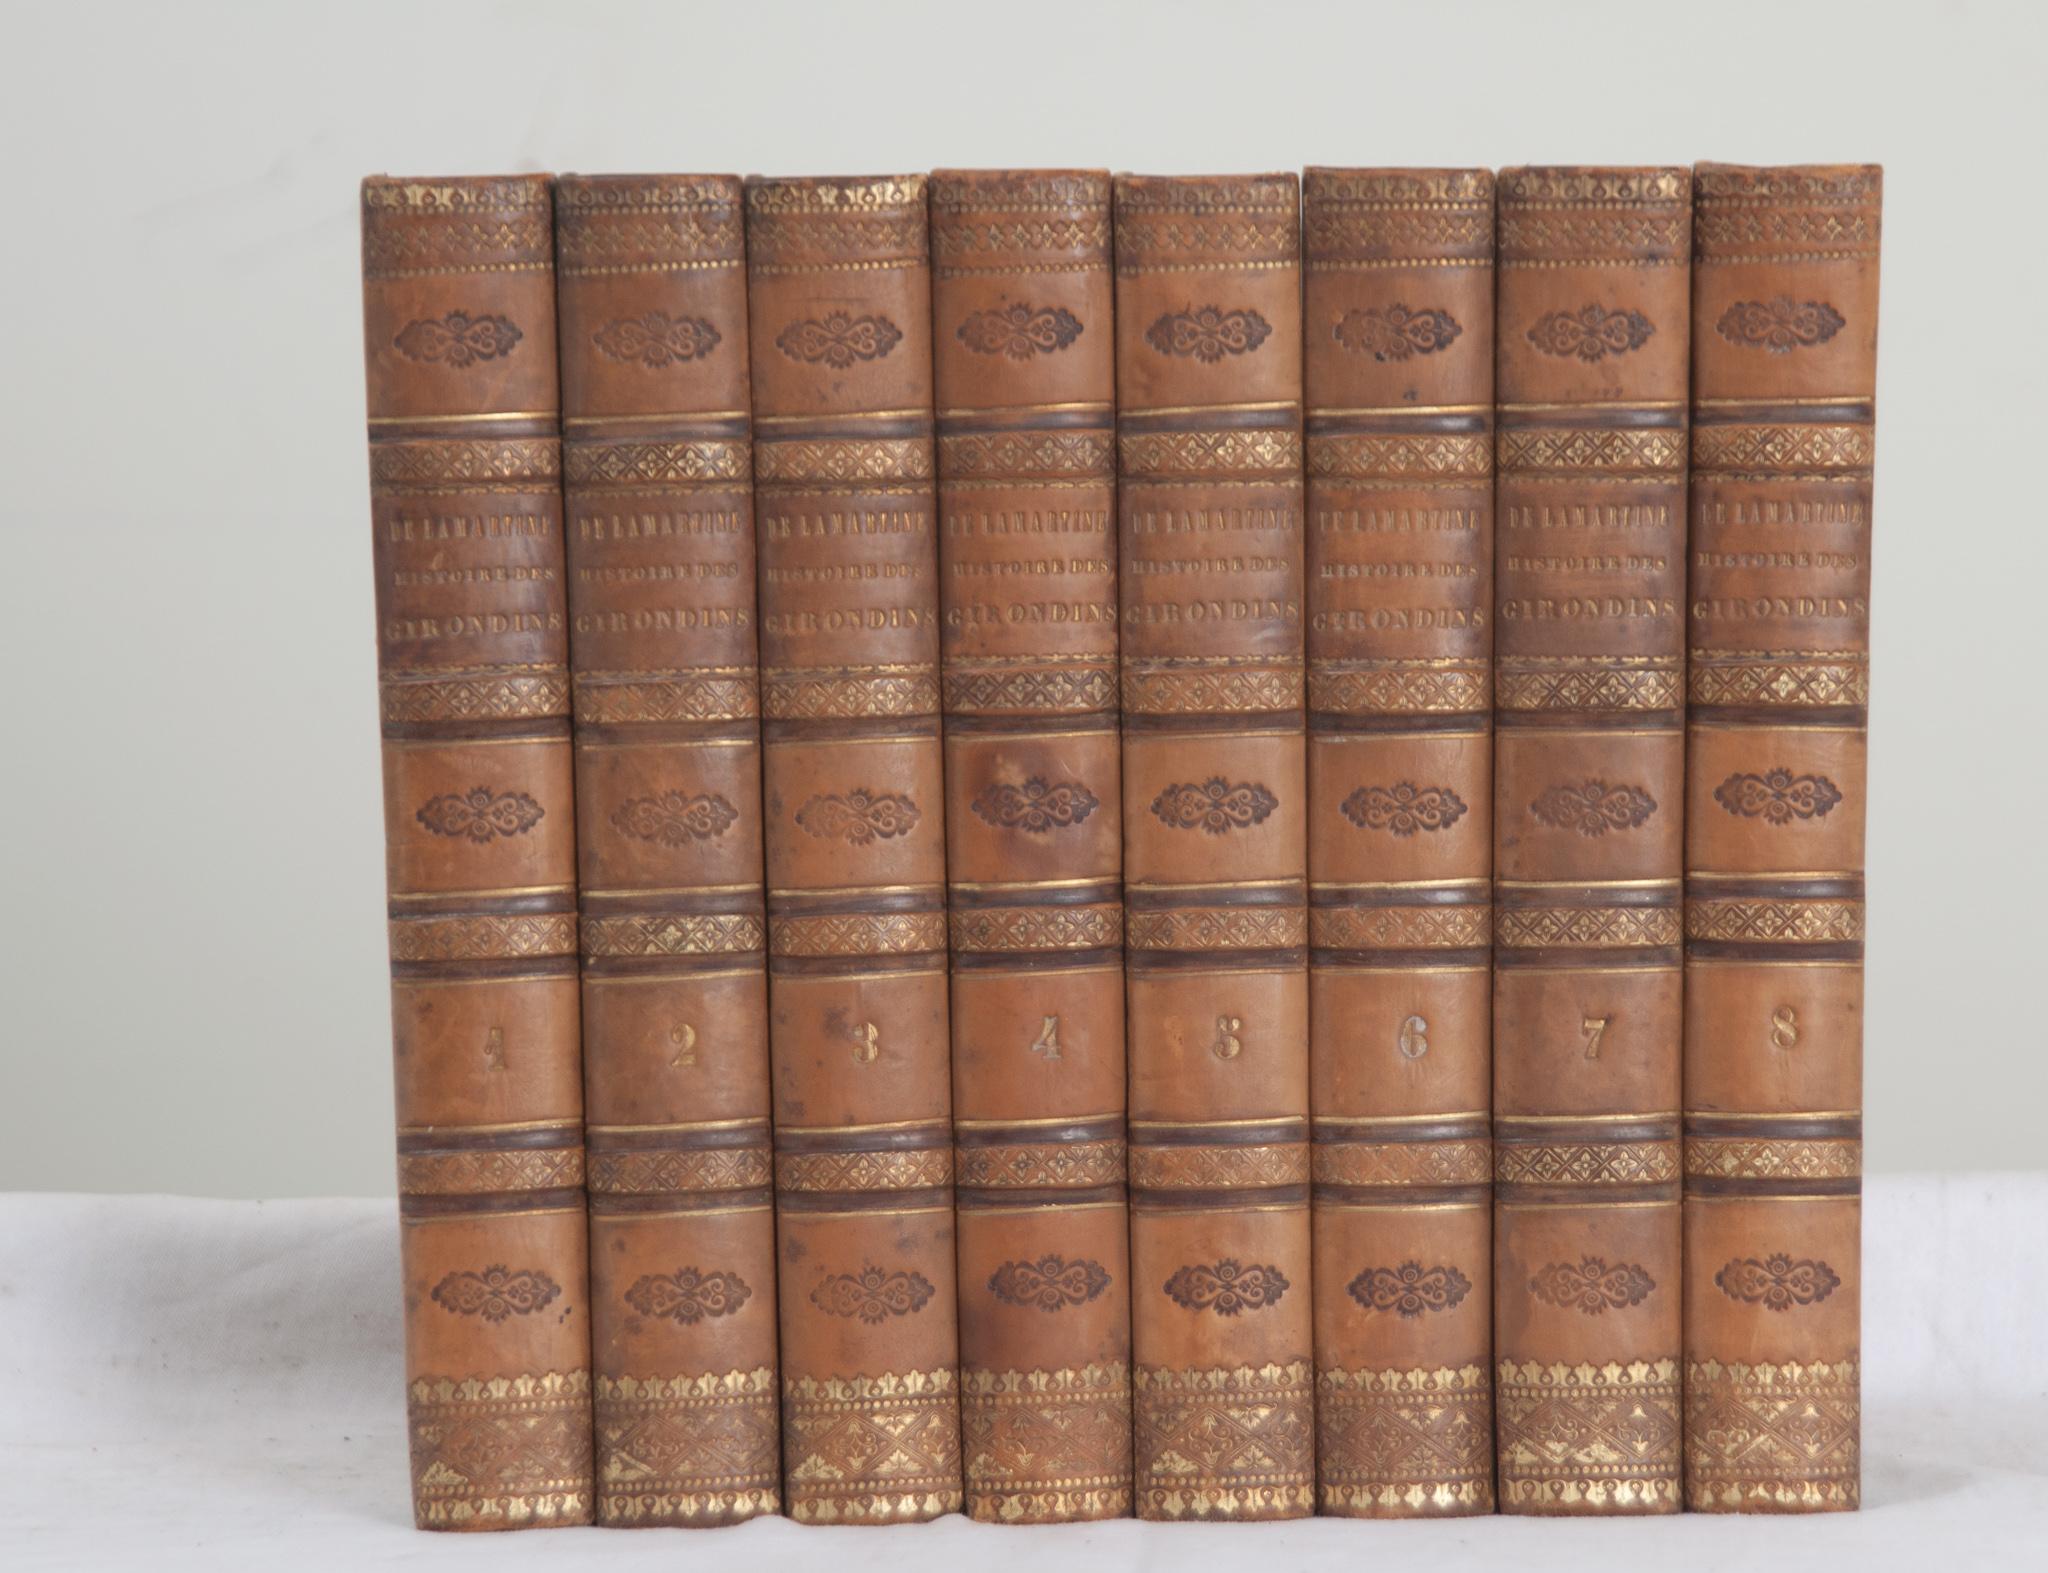 Other Set of 8 Leather-Bound Books by A. de Lamartine